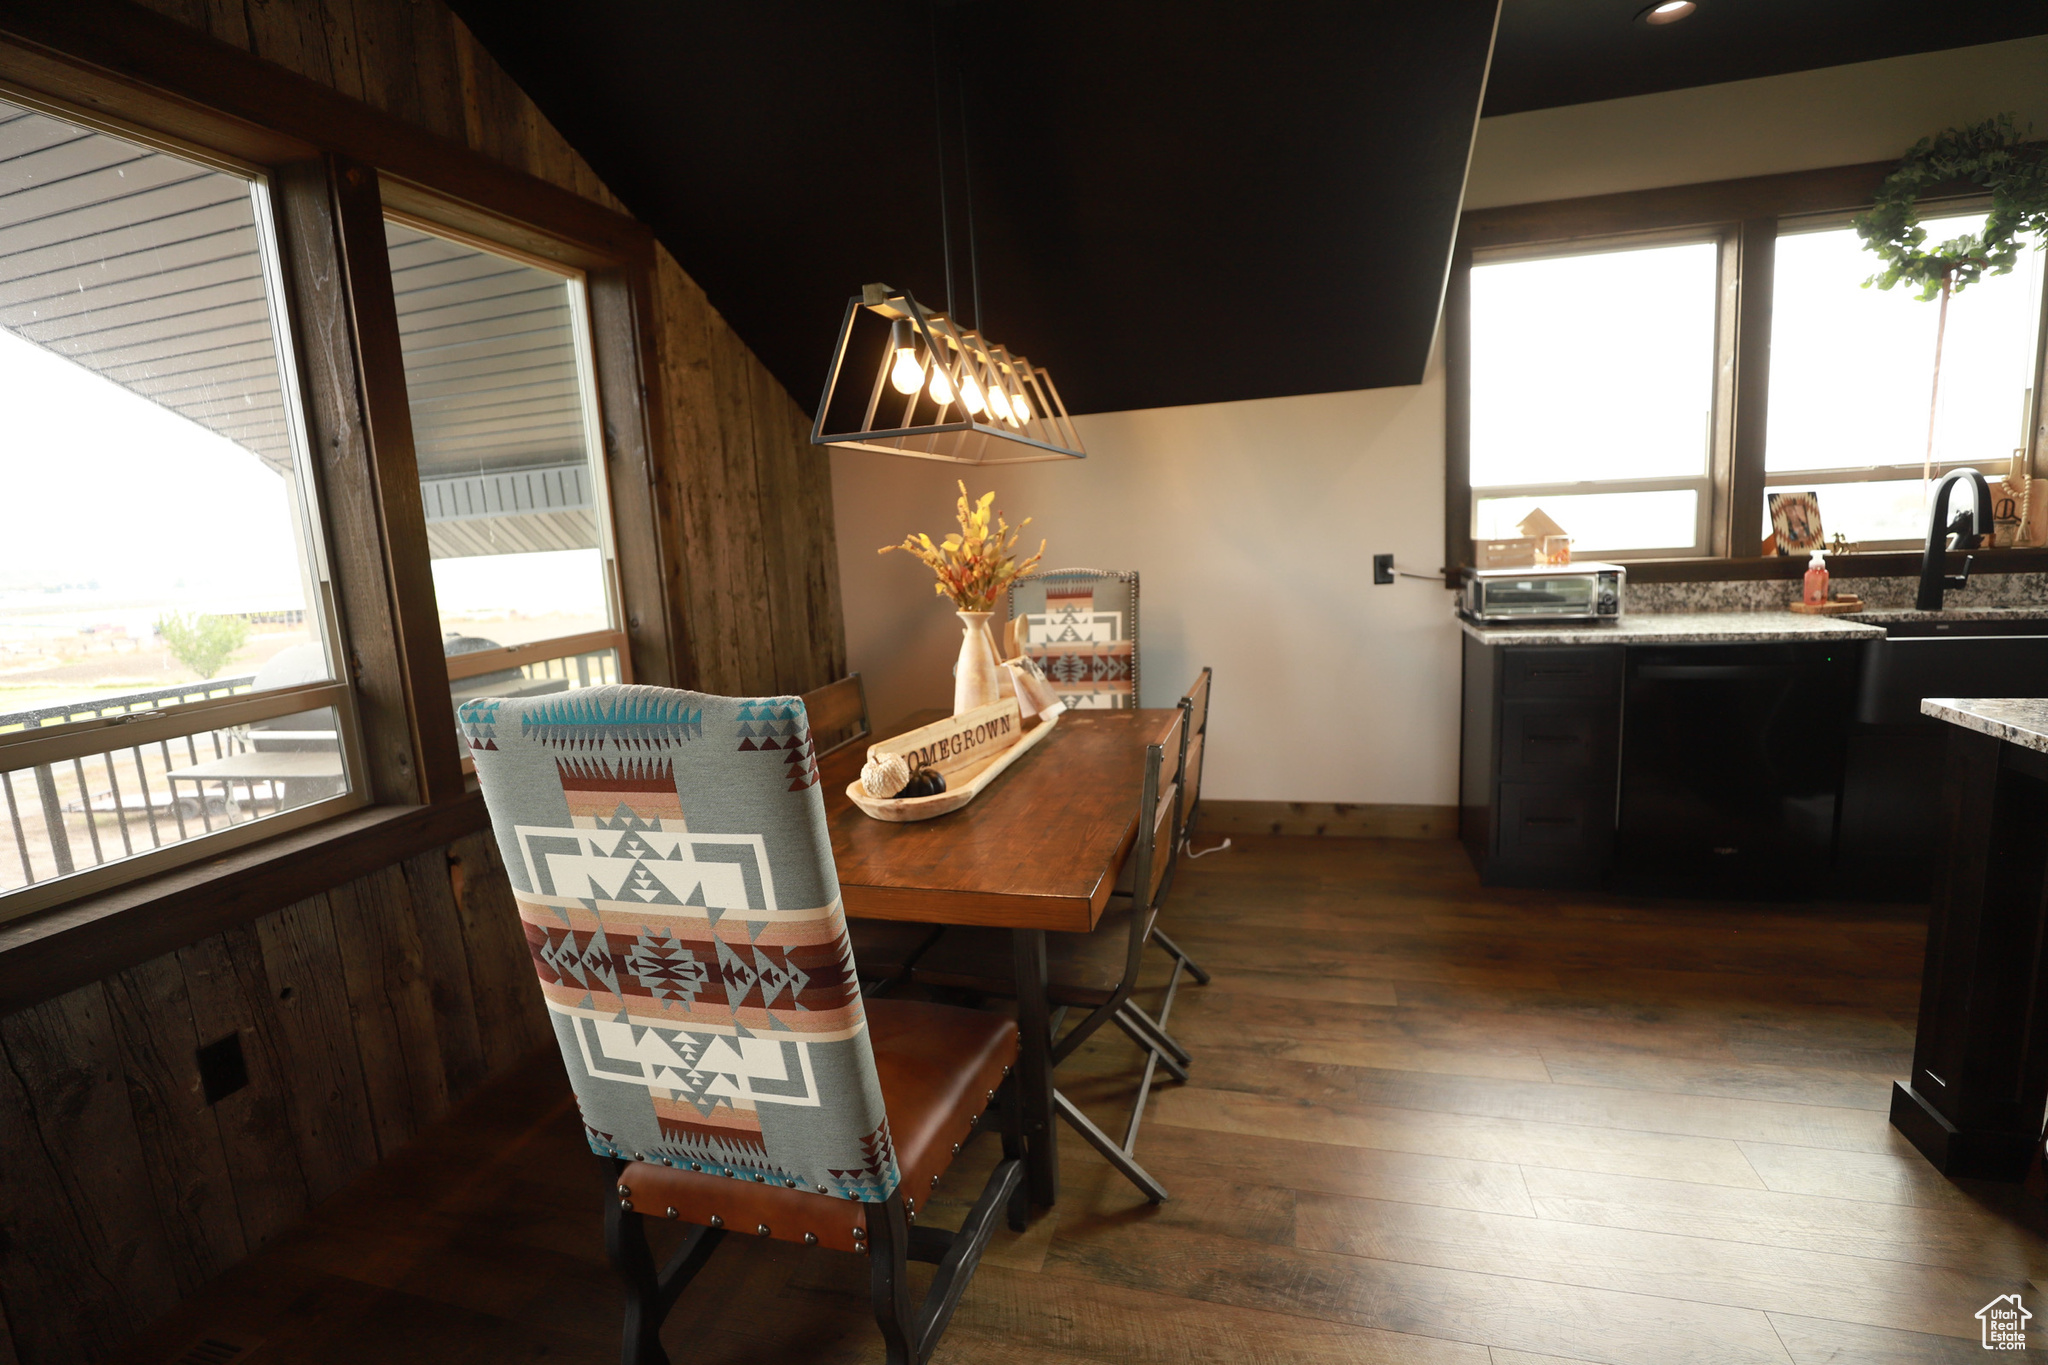 Dining room with dark hardwood / wood-style floors, wooden walls, vaulted ceiling, and plenty of natural light